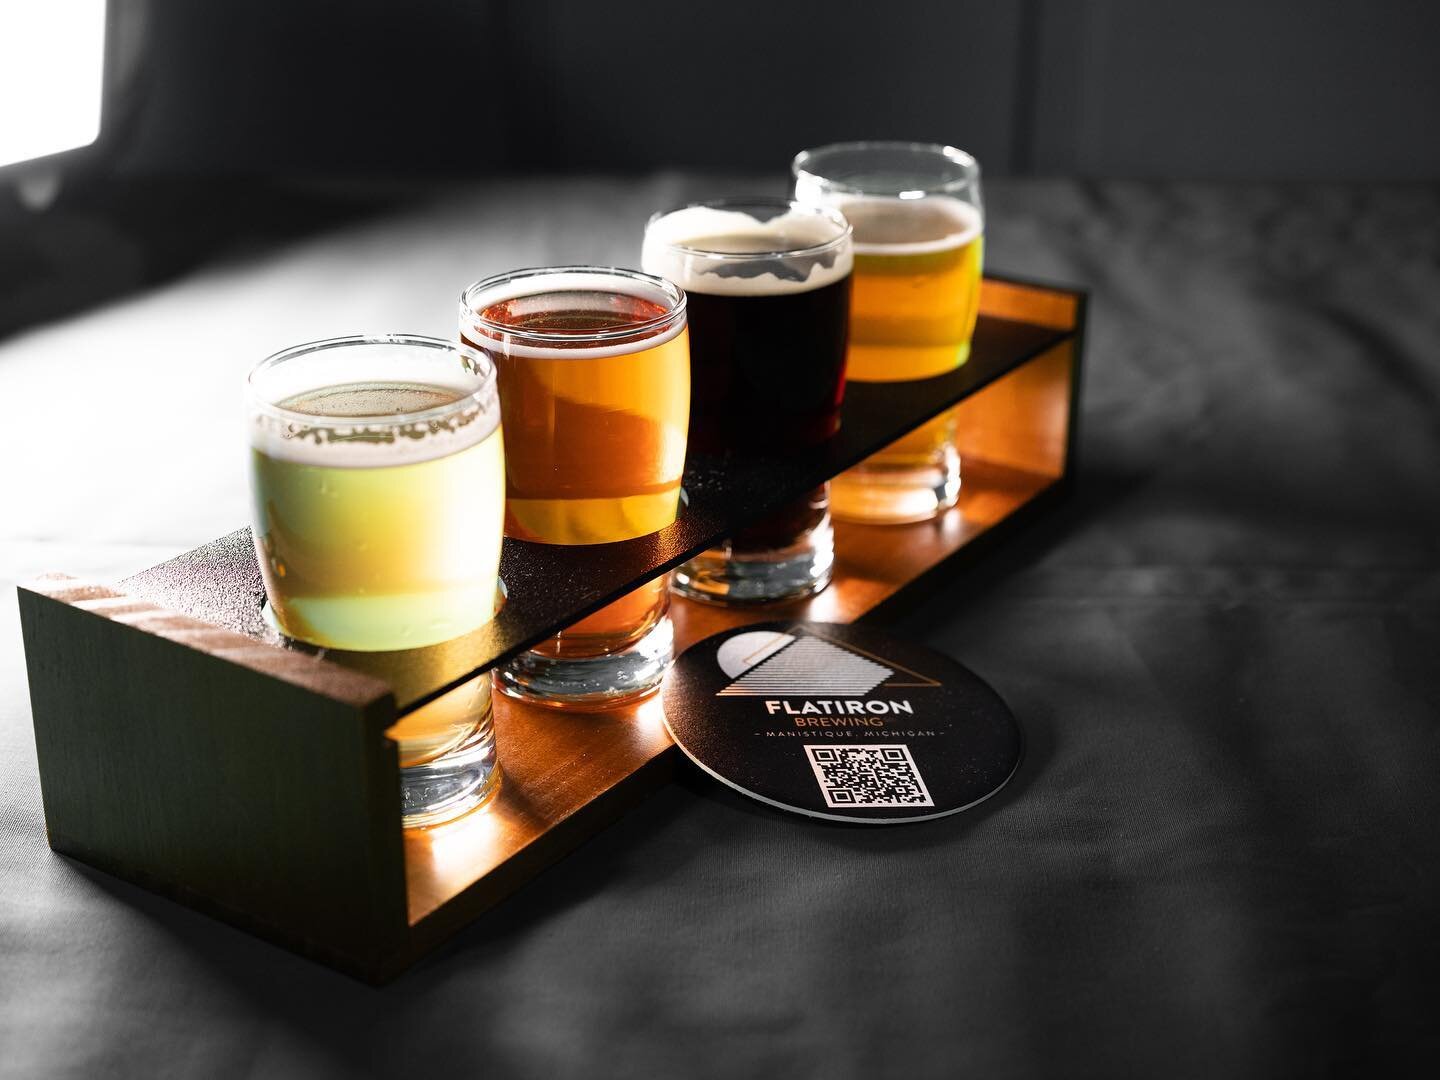 Sample four beers at once with a Flatiron flight!  The taproom is open from 3-10pm today (food service ends at 9pm) #craftbeer #yooperlife #discovermanistique